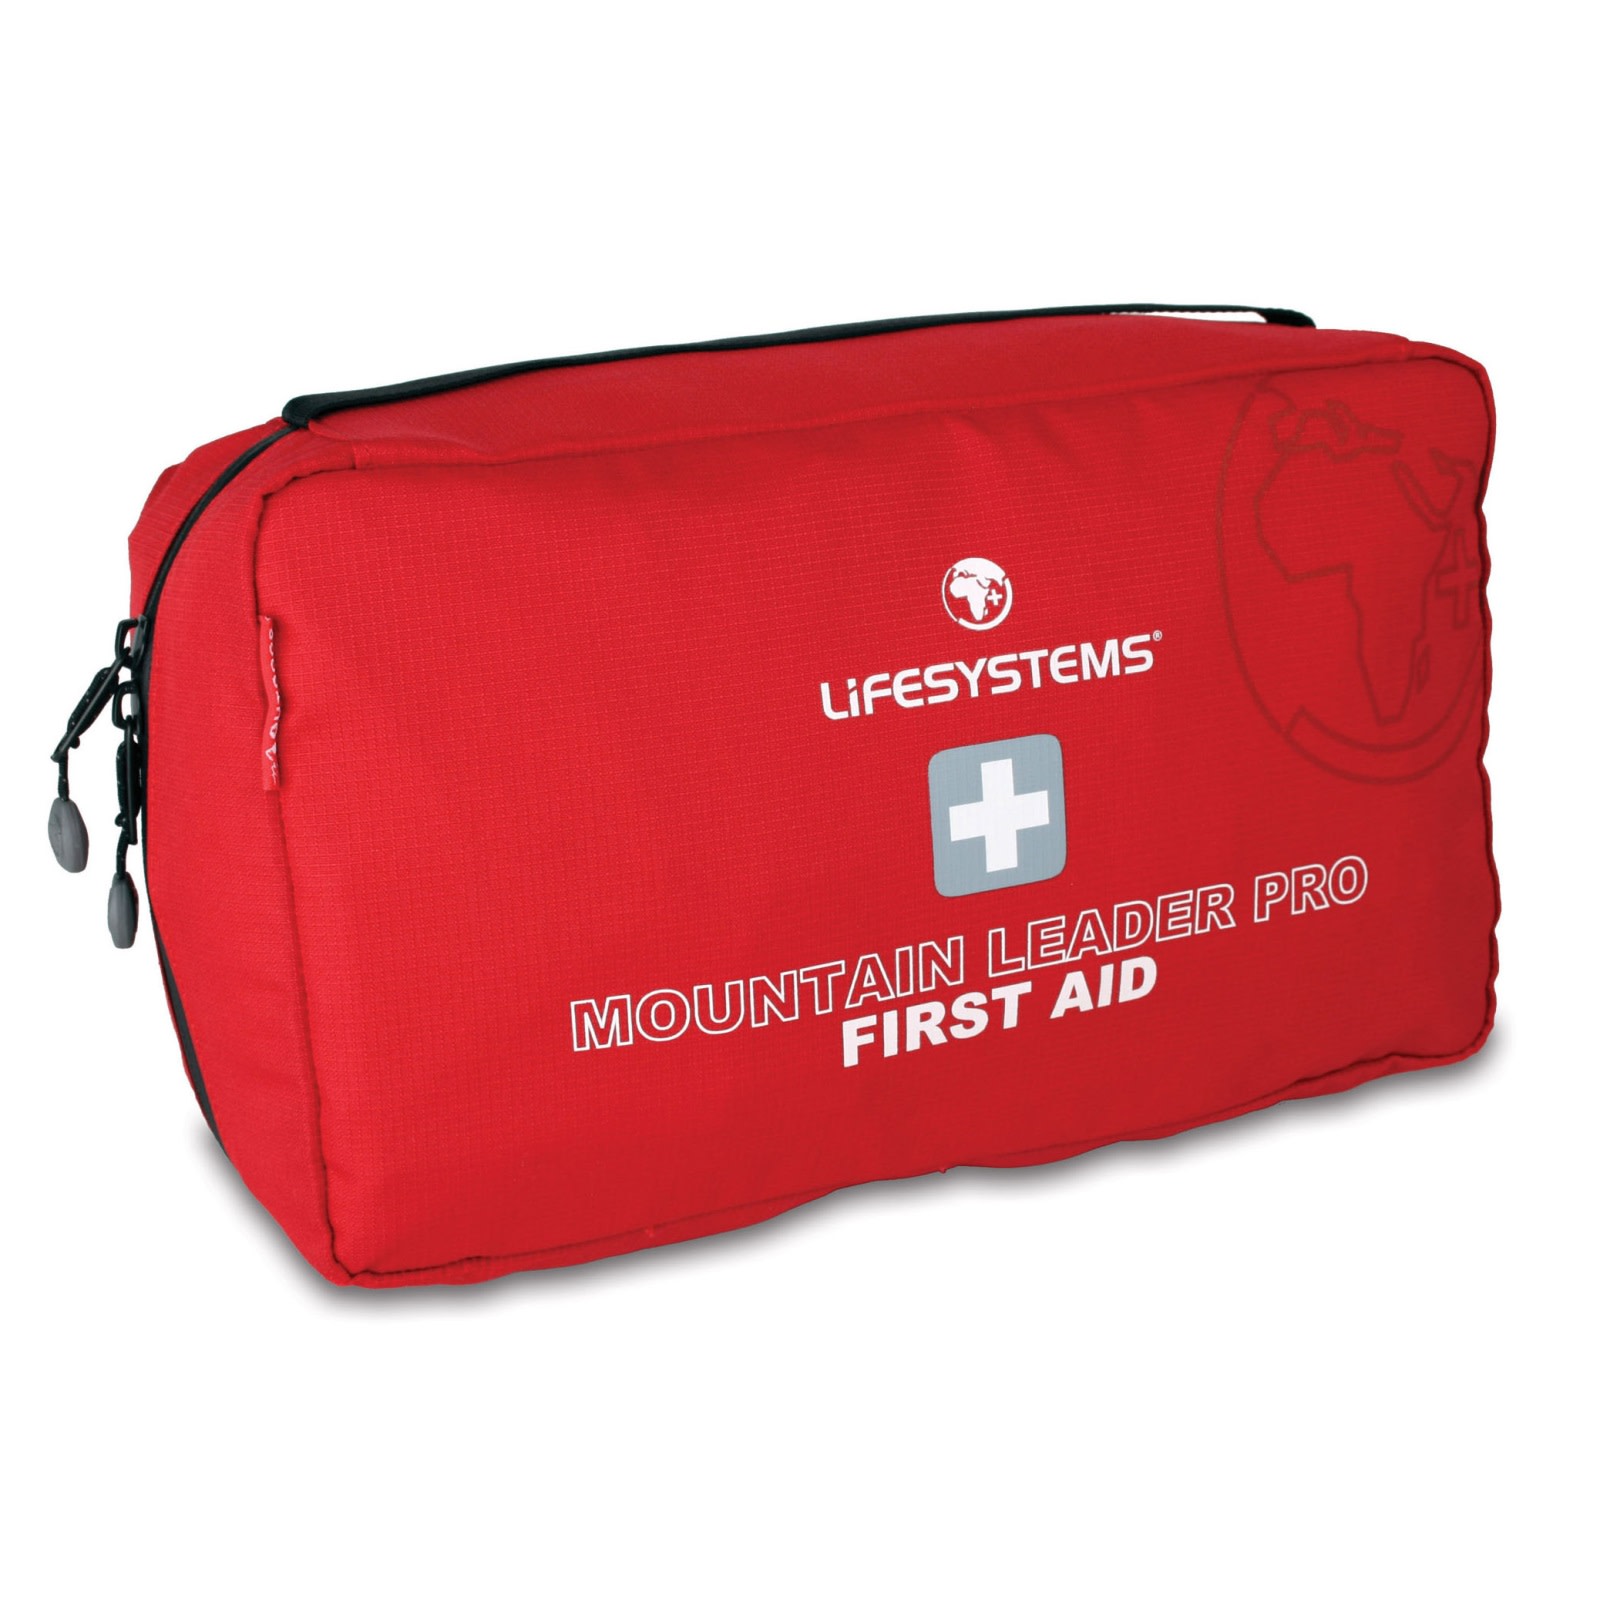 Lifesystems Mountain Leader Pro First Aid  No Color